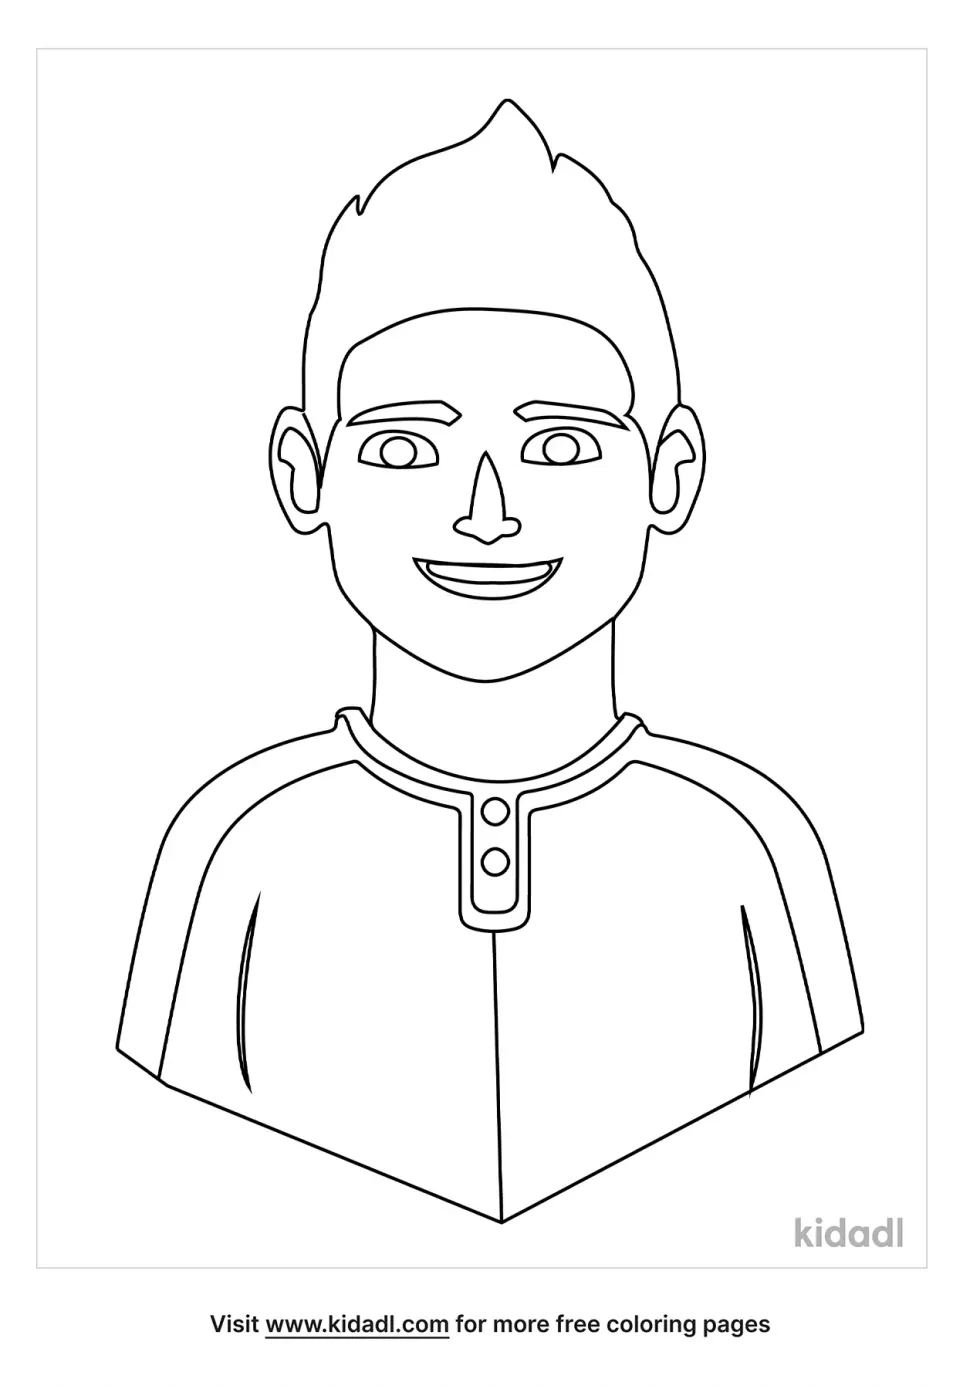 James Rodriguez Coloring Page